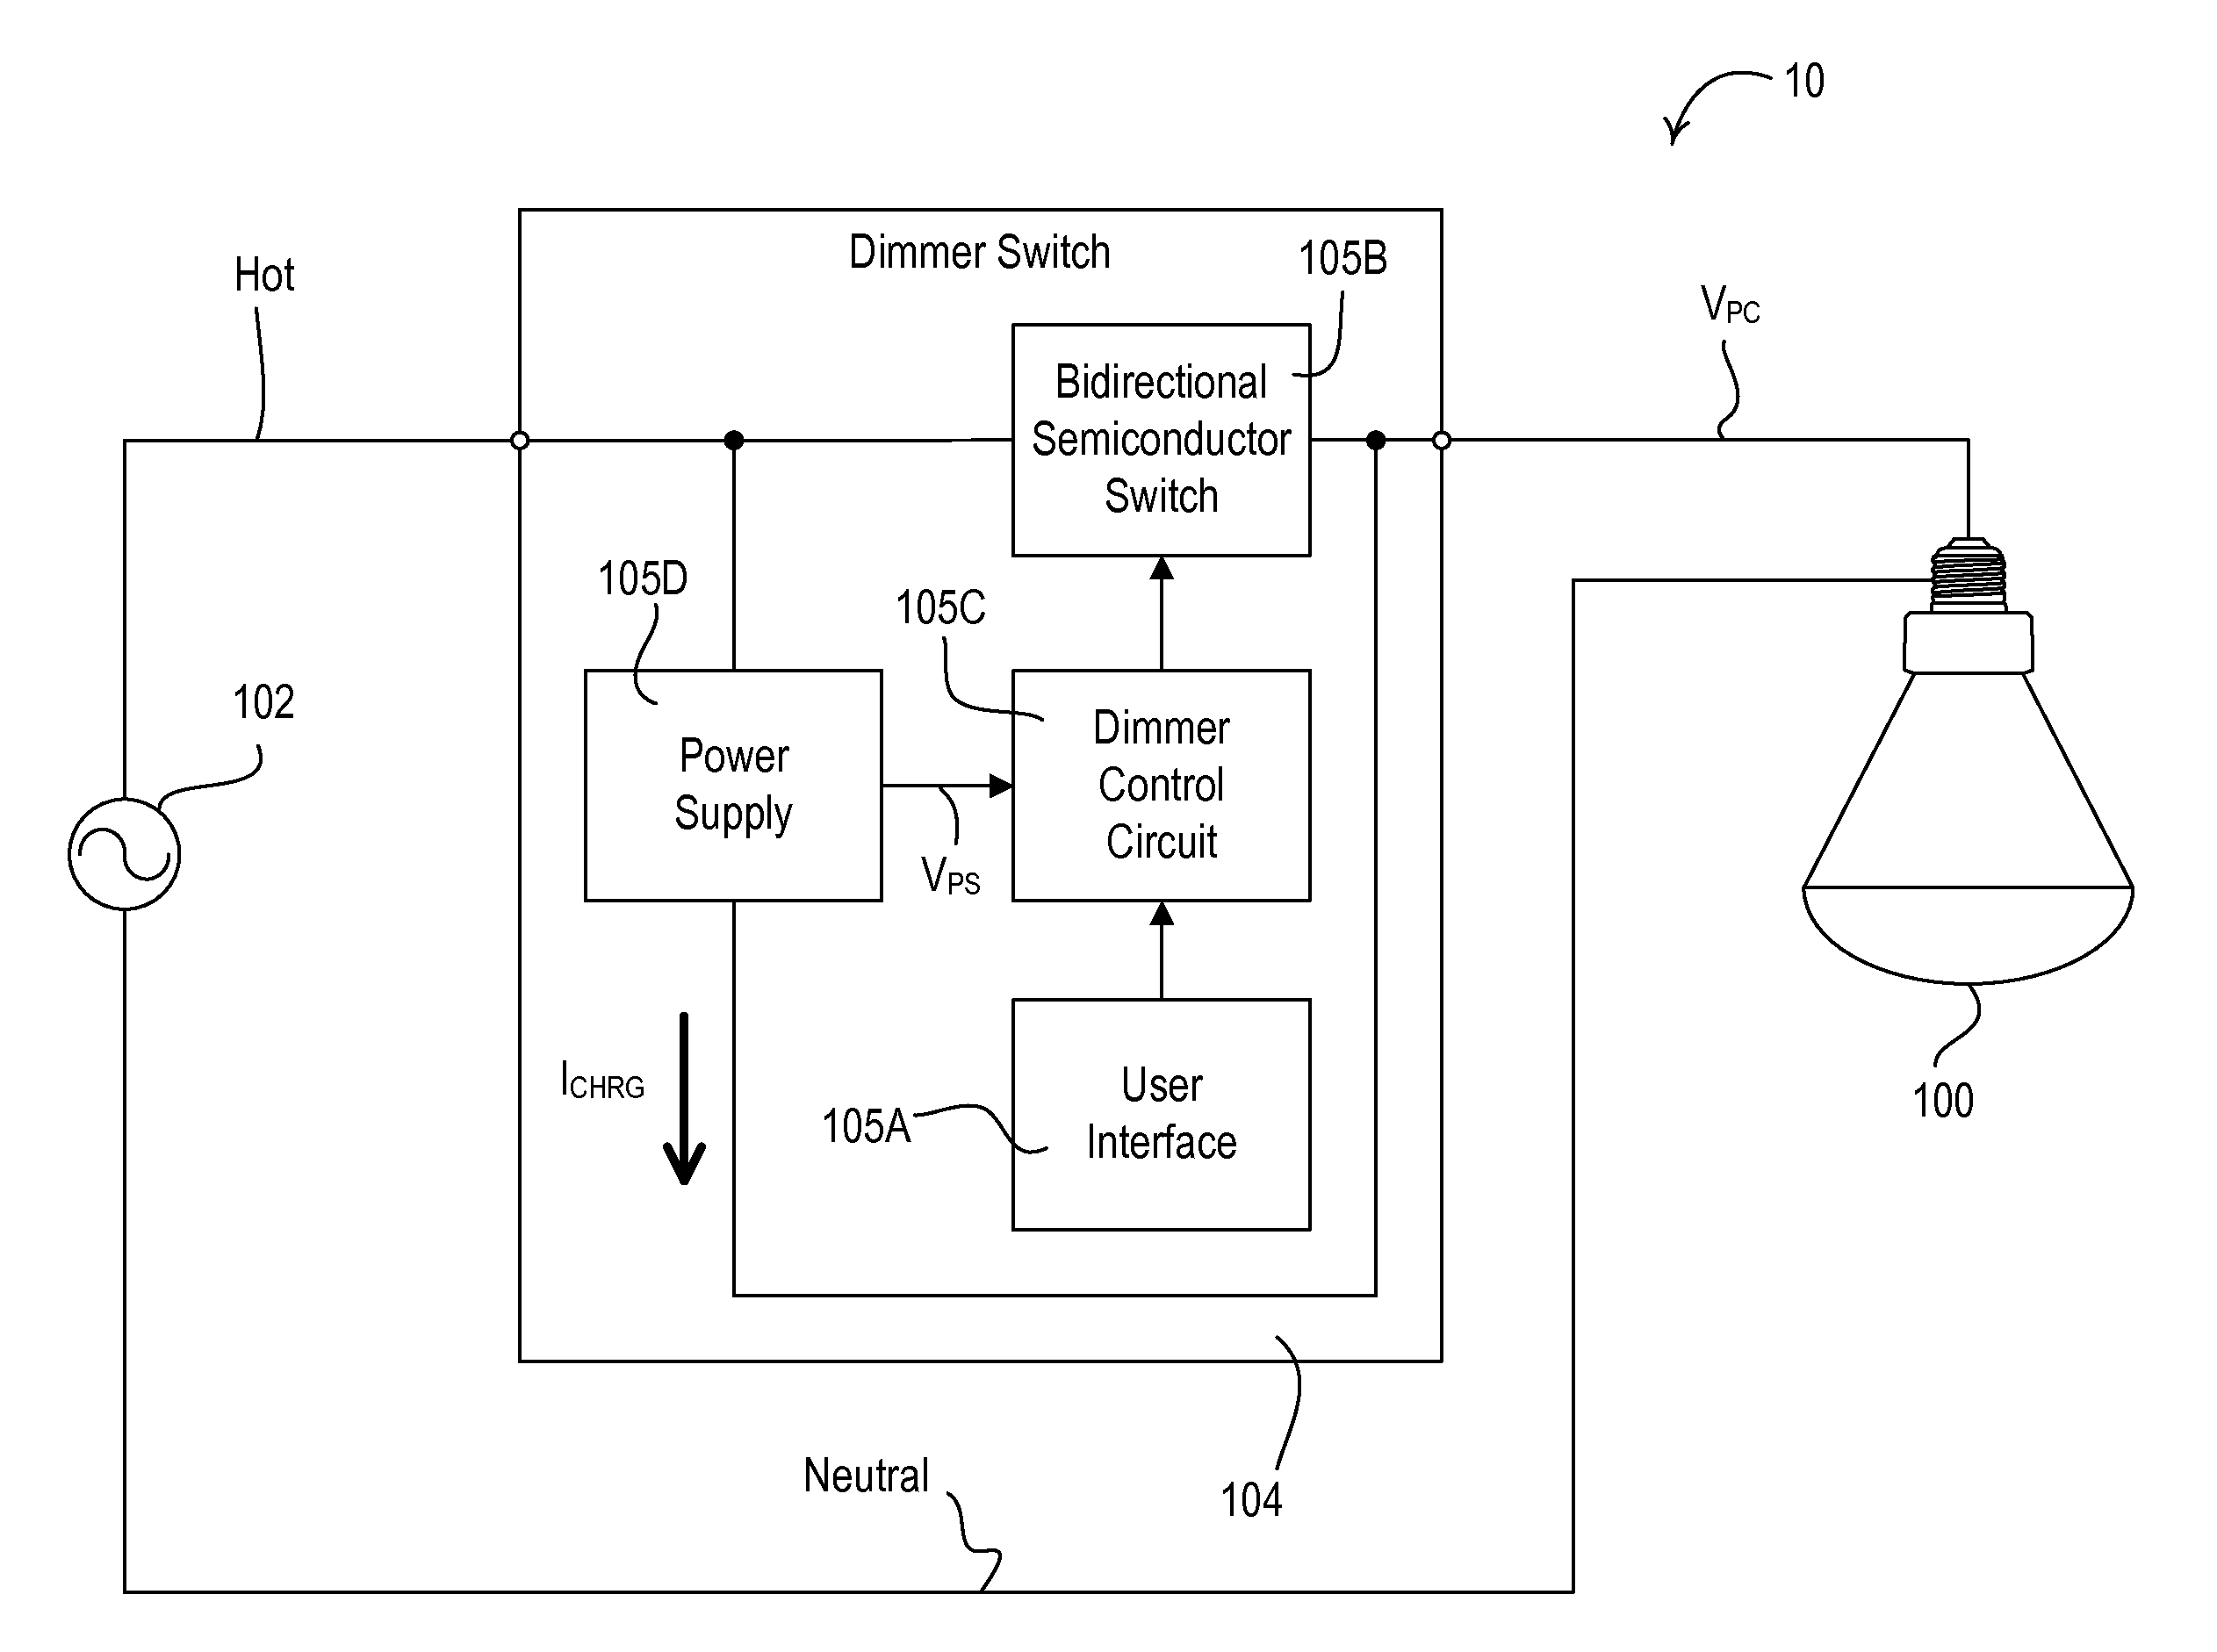 Method of Striking a Lamp in an Electronic Dimming Ballast Circuit